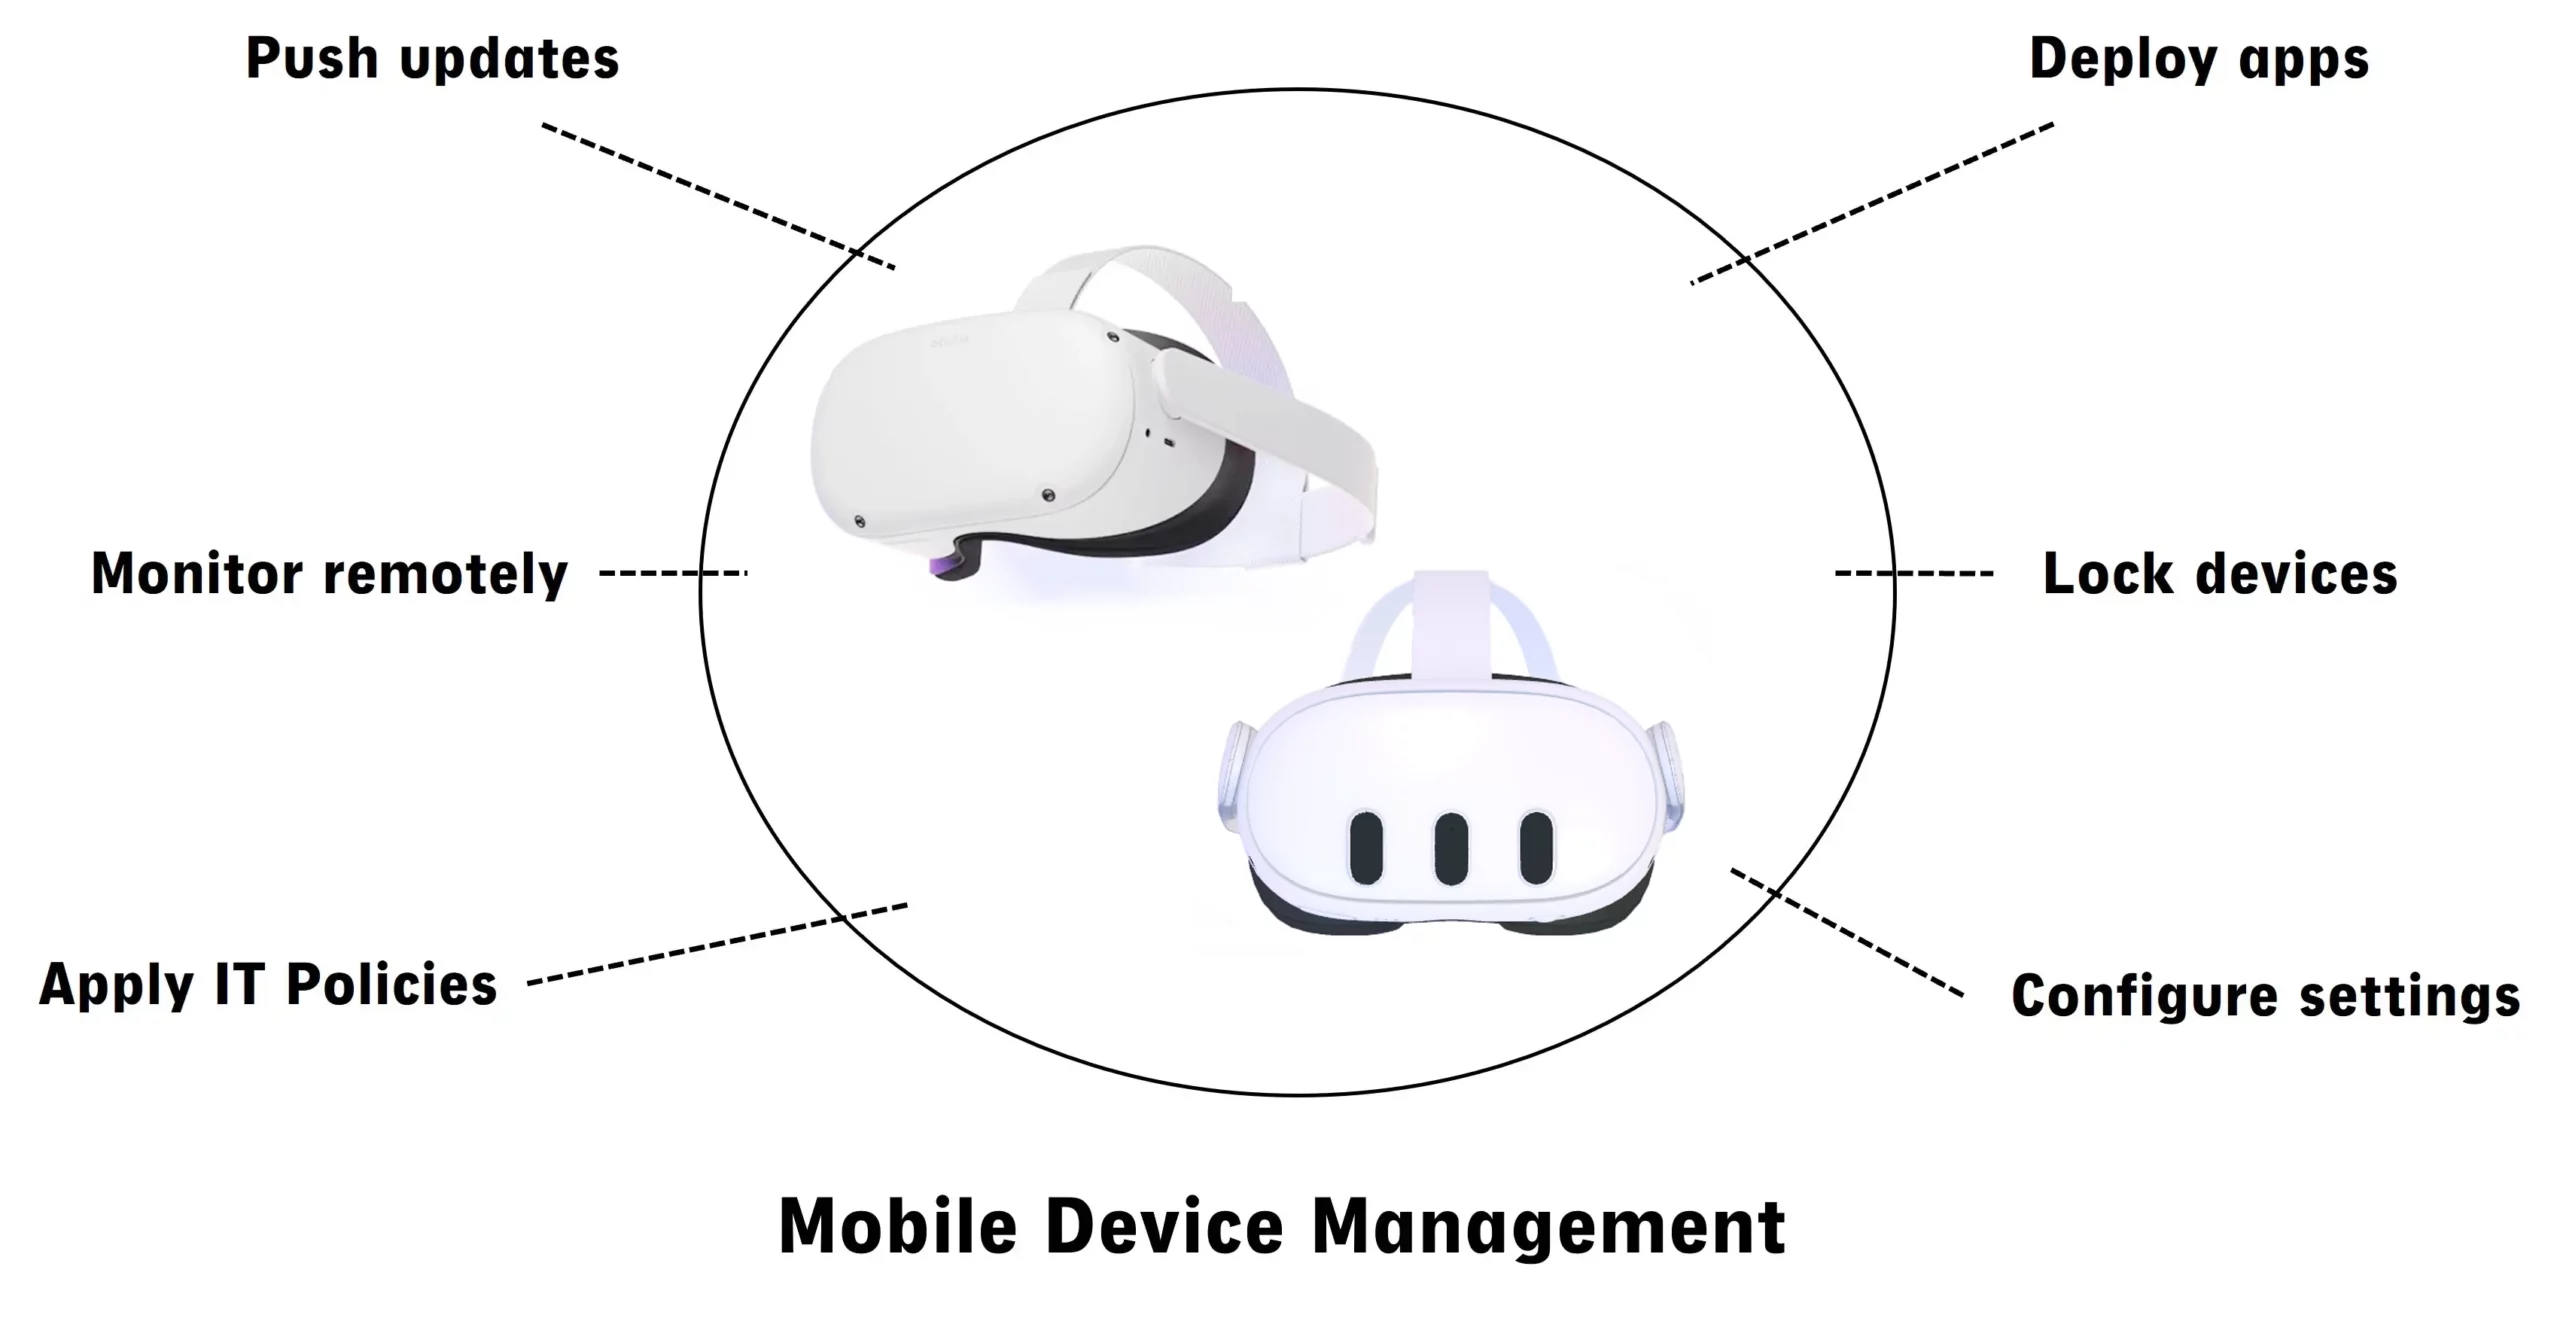 MDM (Mobile Device Management) quest 2 and 3